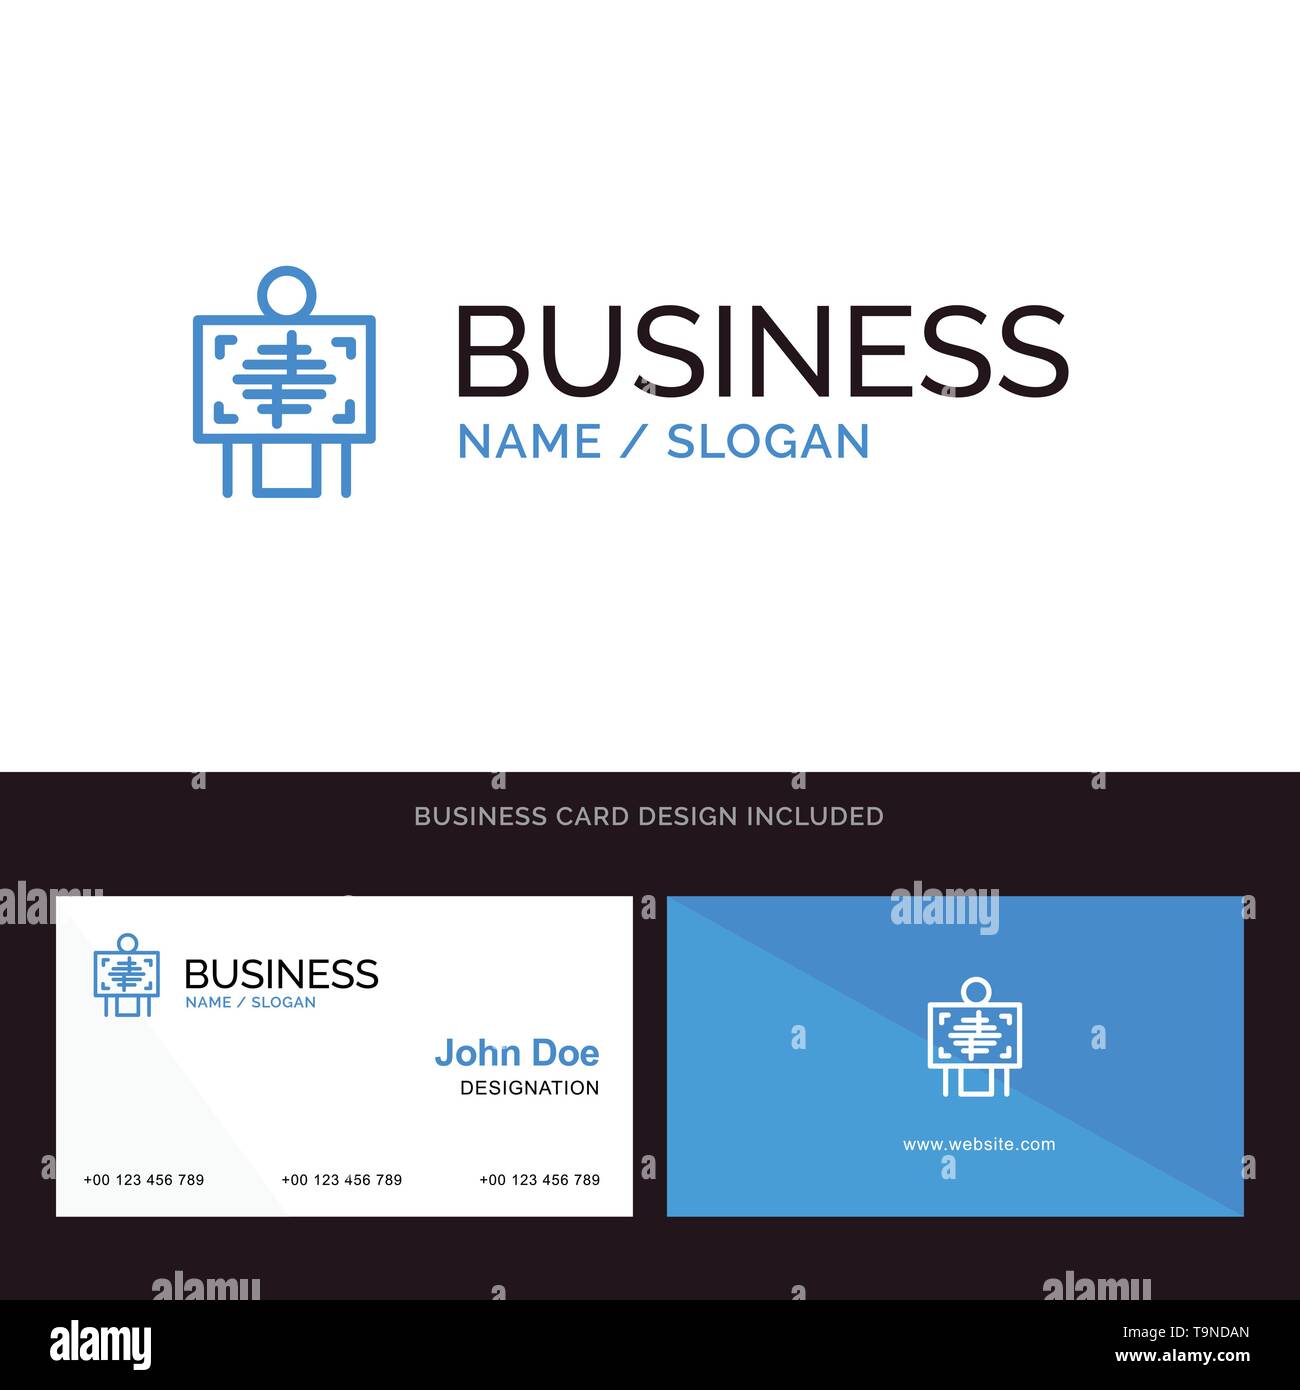 xray business cards 5